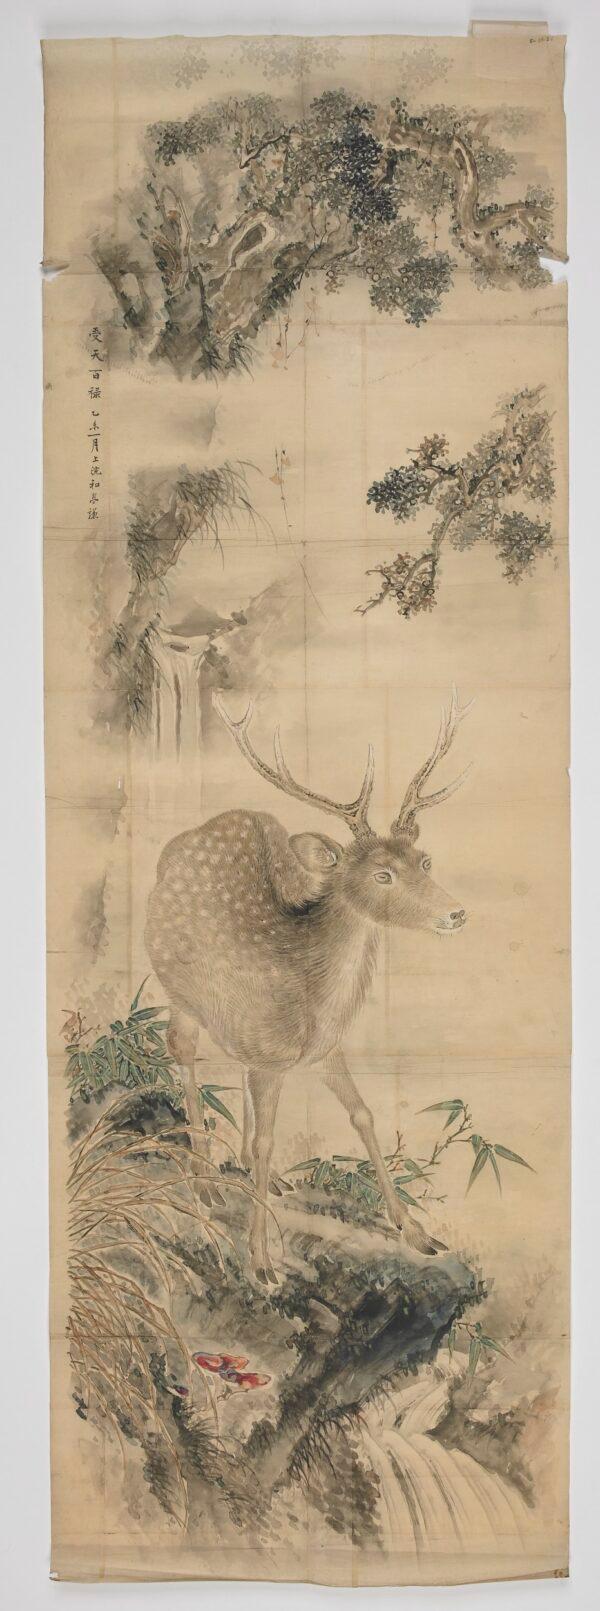 "Deer" by Taki Katei. Paper, pigment, and ink; 65 9/16 inches by 21 7/8 inches. (Keith Sweeney/National Museums Liverpool)